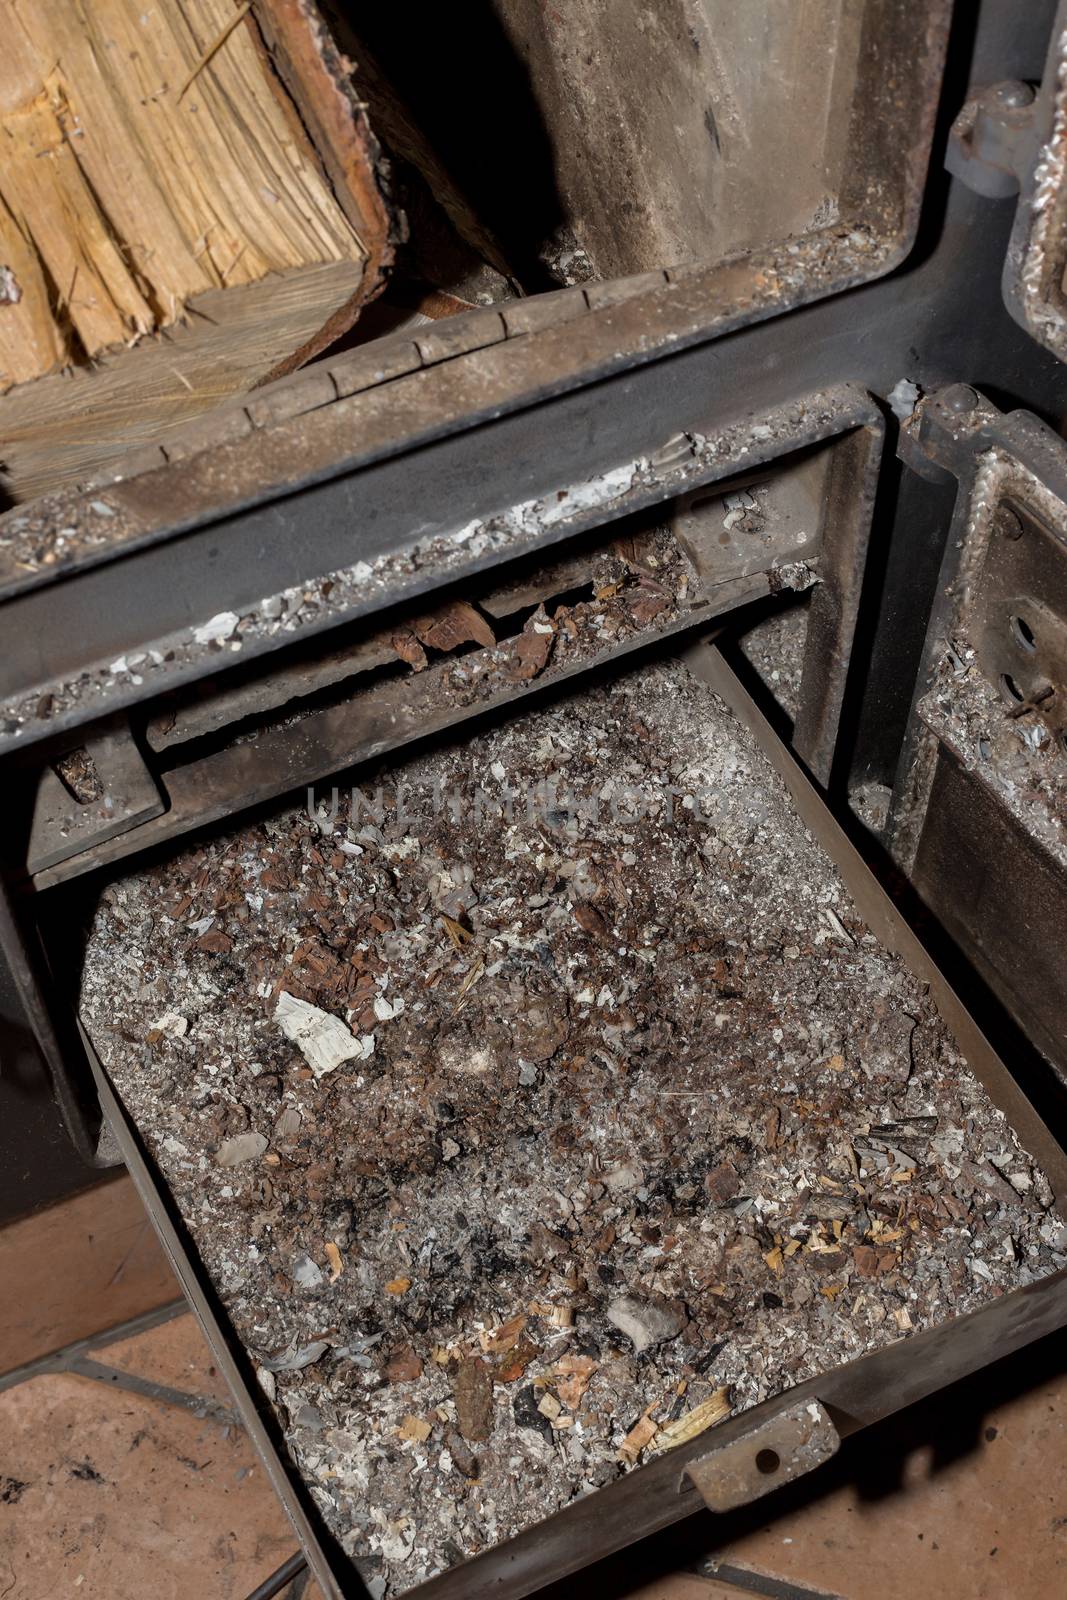 A box full of ashes under the fireplace